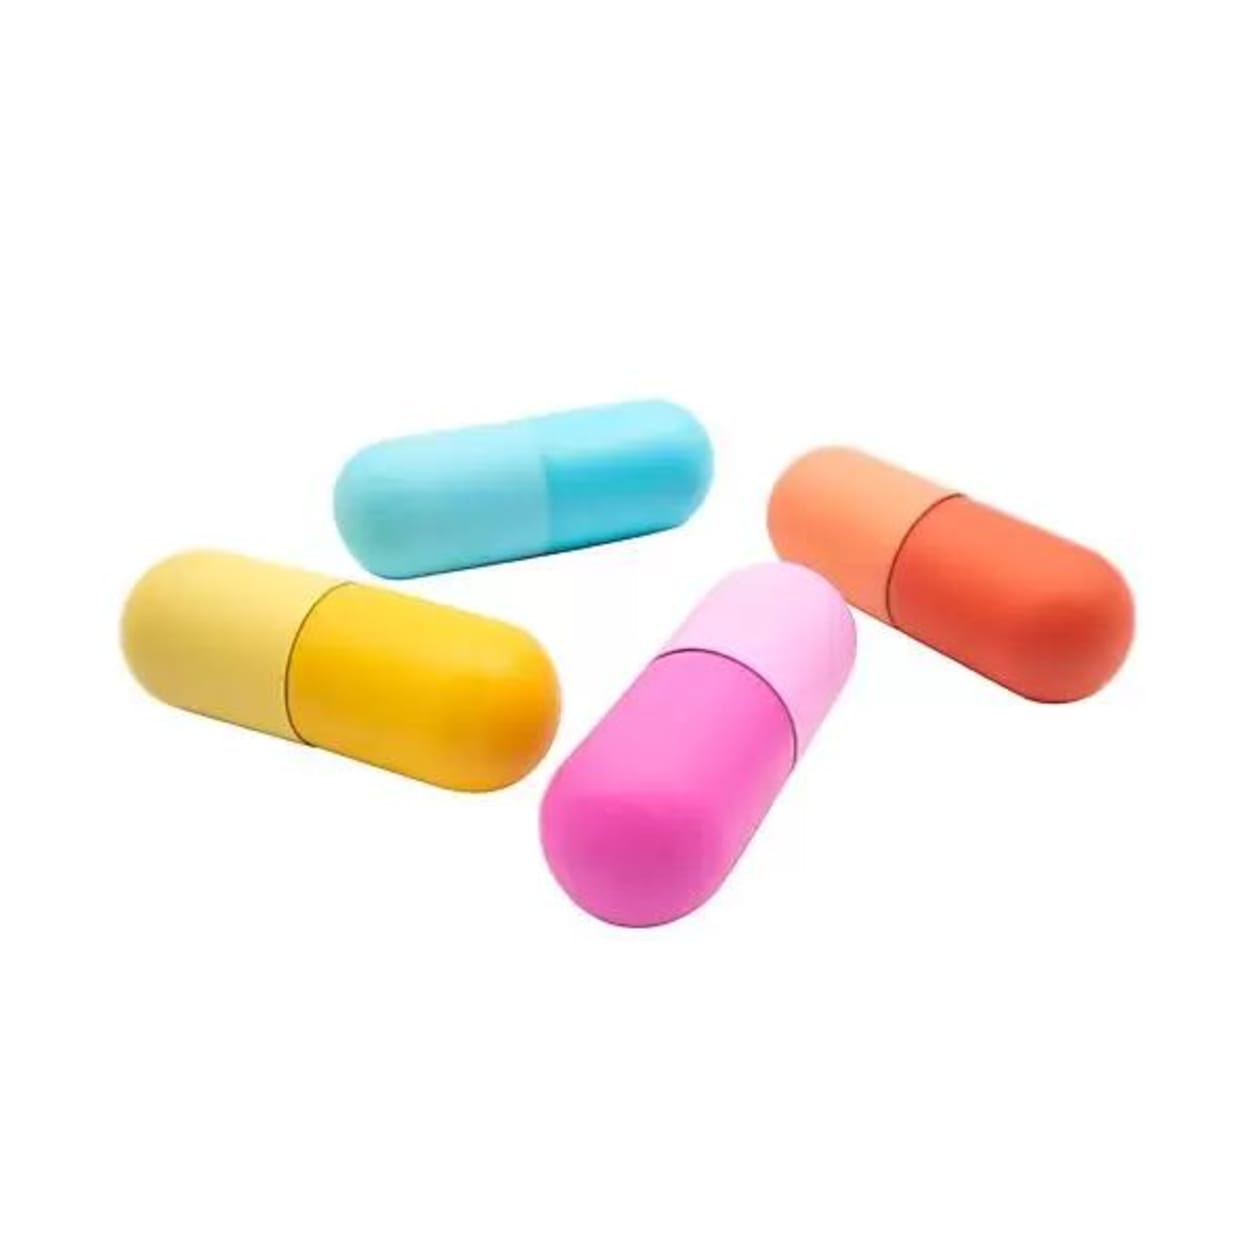 Pill-Shaped Pill Box in Bright Pastels | Aluminum Tin Container for Pills | 3/4" Diam. x 2-1/2" Tall - Color: Mini - Set of 4 (Blue Orange Pink and Yellow Gradient)